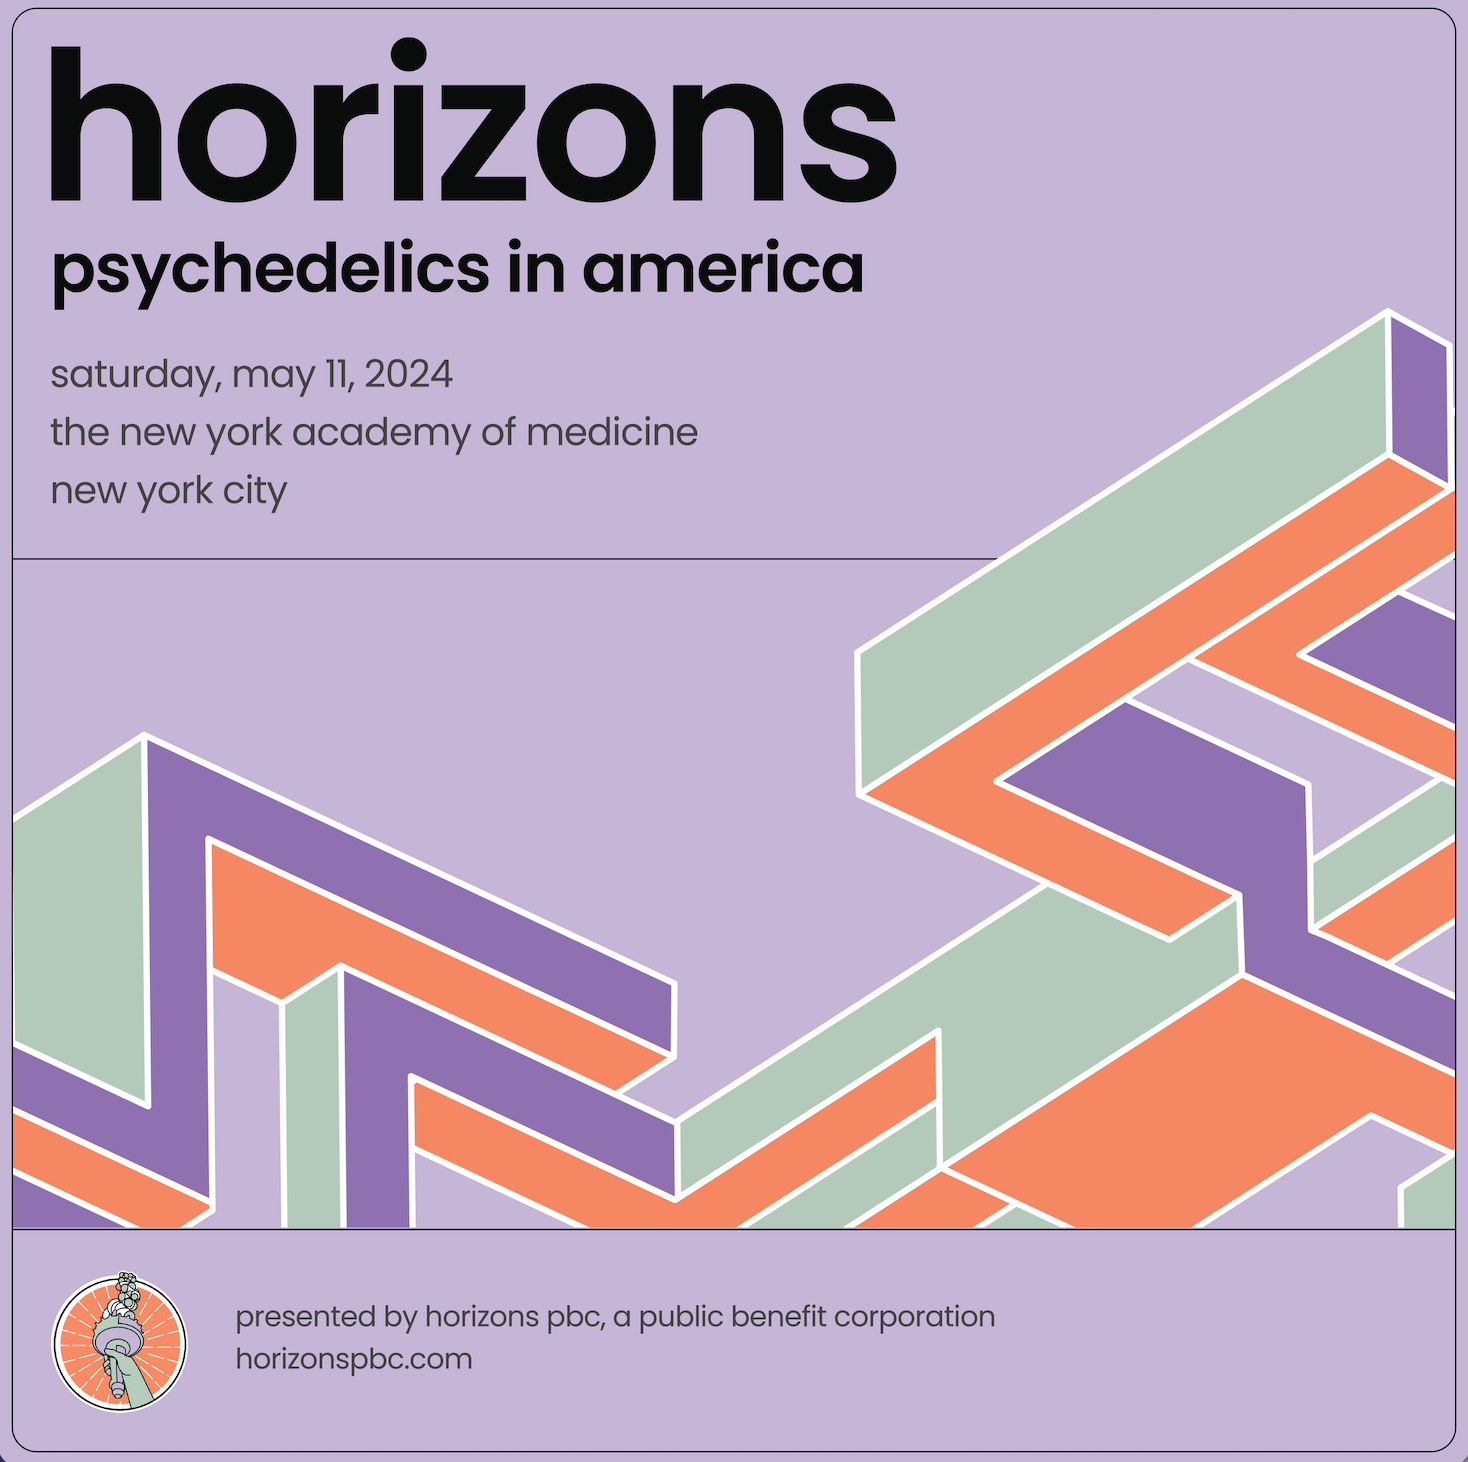 A poster for horizons psychedelics in america